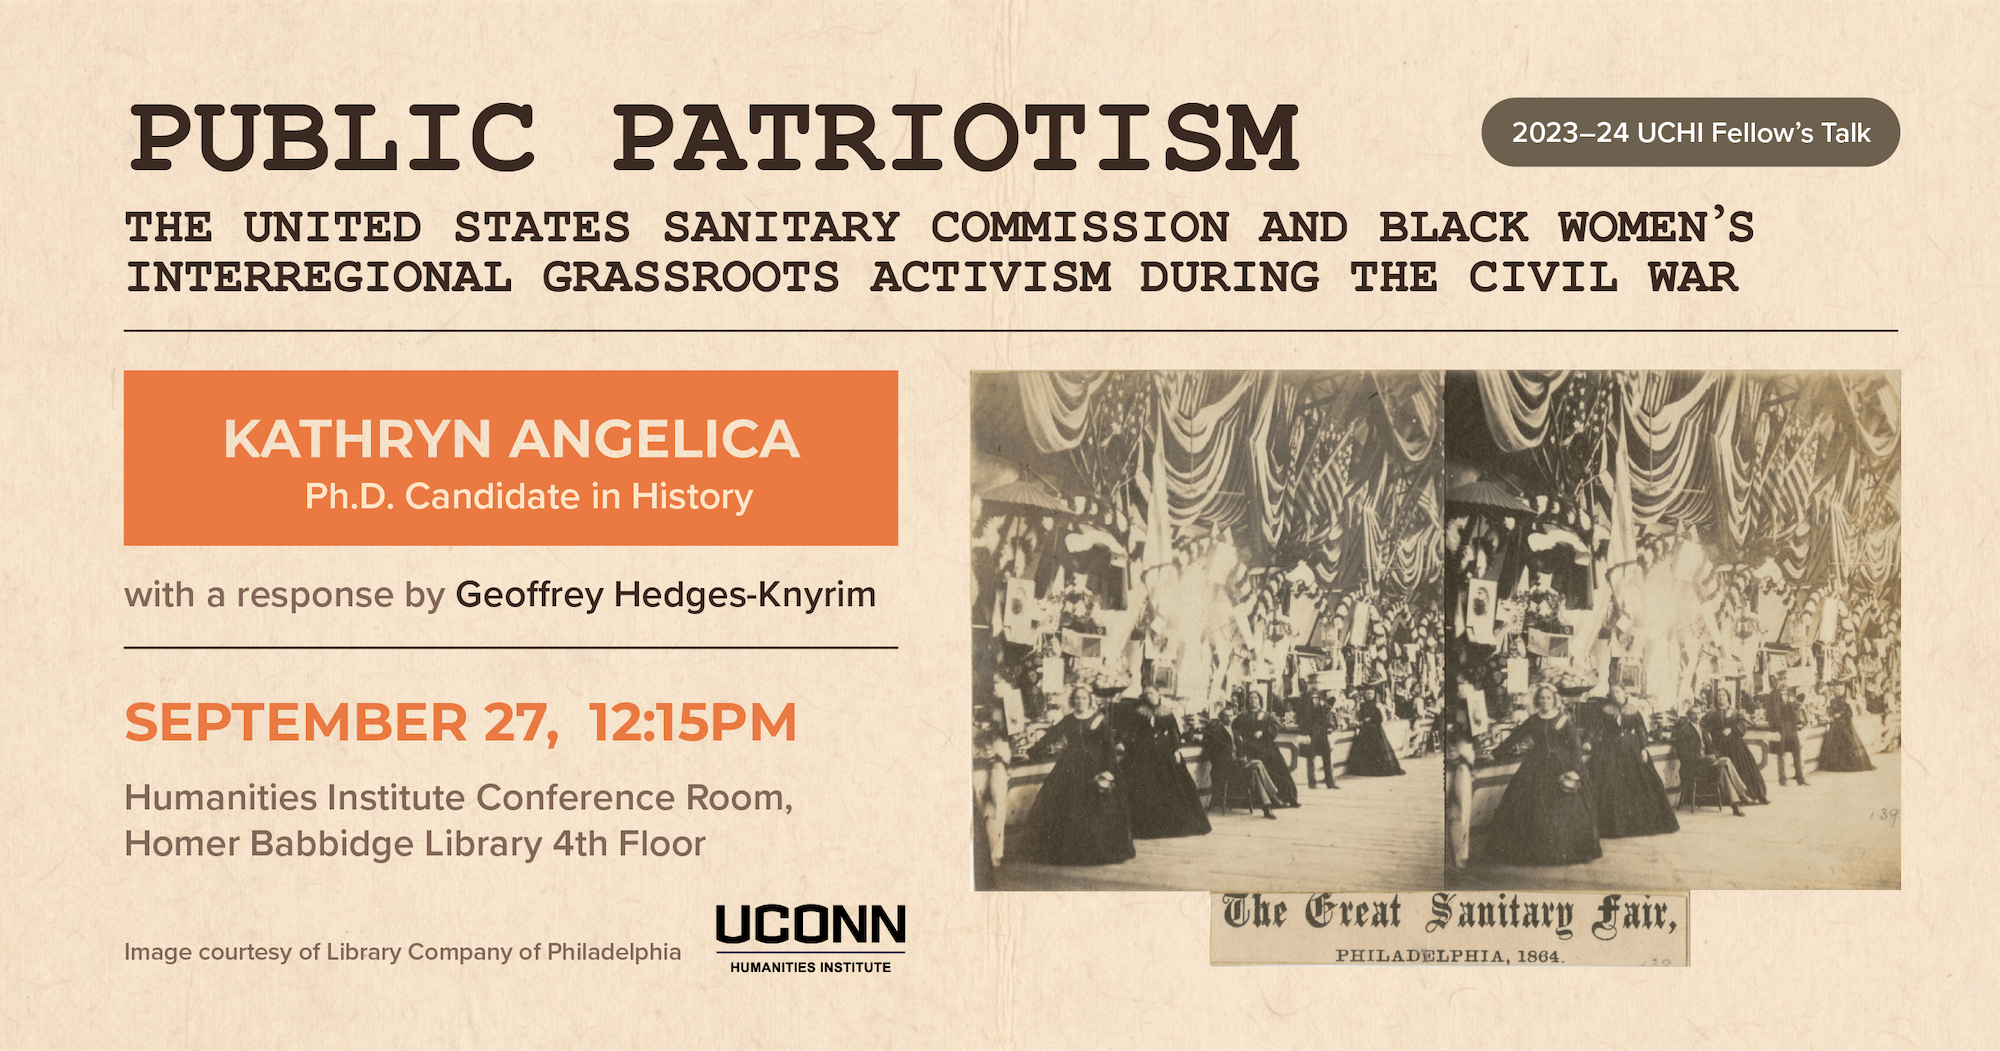 2023–24 UCHI Fellow's Talk. Public Patriotism: The United States Sanitary Commission and Black Women's Interregional Grassroots Activism During the Civil War. Kathryn Angelica, Ph.D. Candidate in history, with a response by Geoffrey Hedges-Knyrim. September 27, 12:15pm. Humanities Institute Conference Room, HBL Fourth Floor.